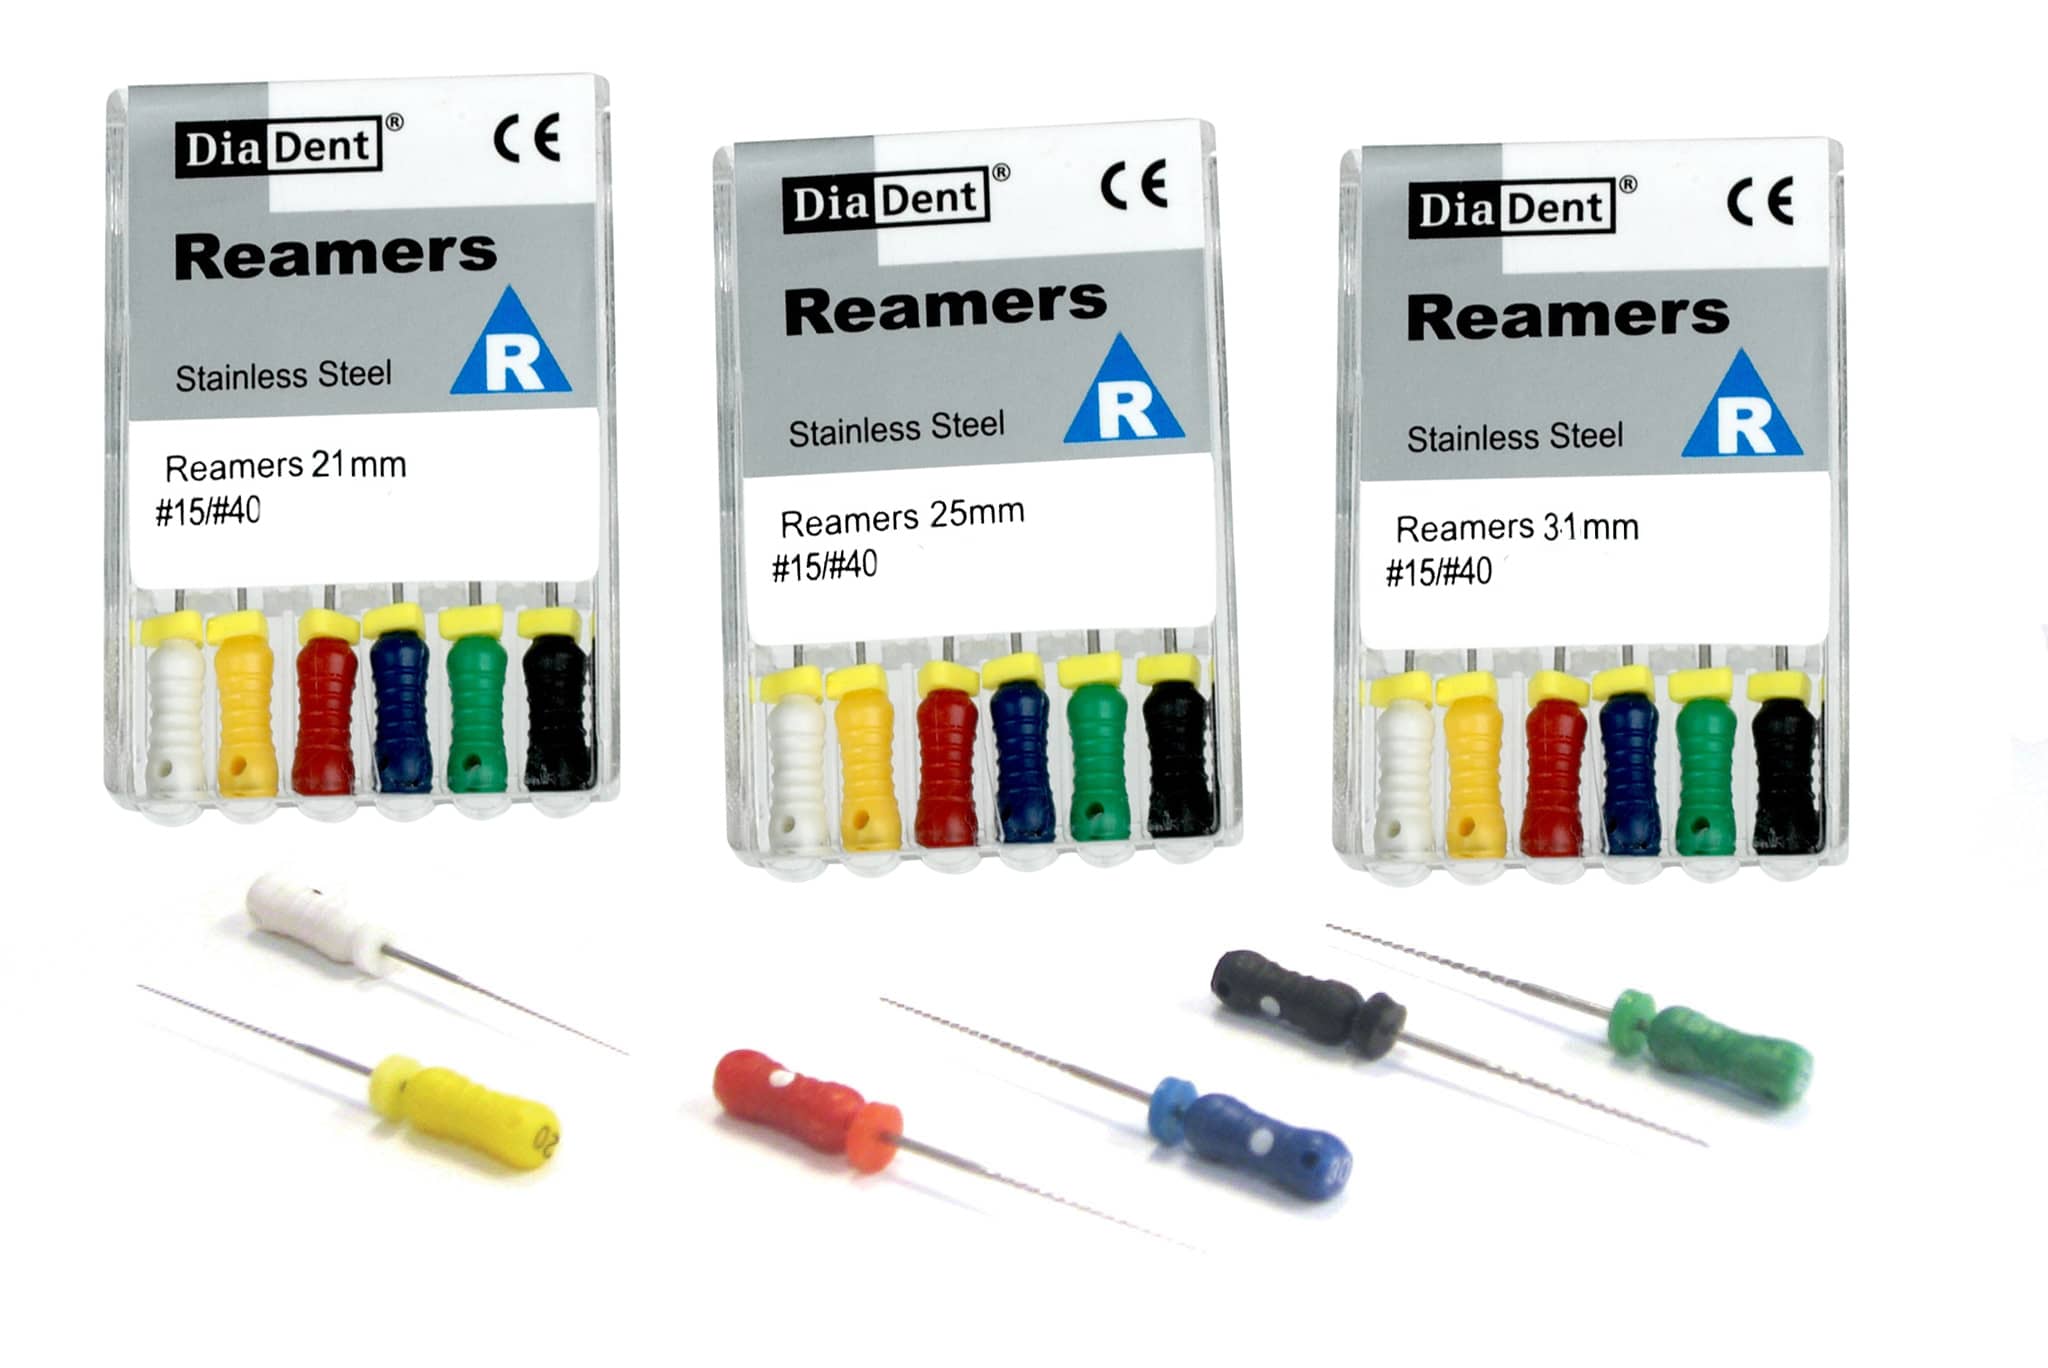 REAMERS Diadent 21mm - 15/40